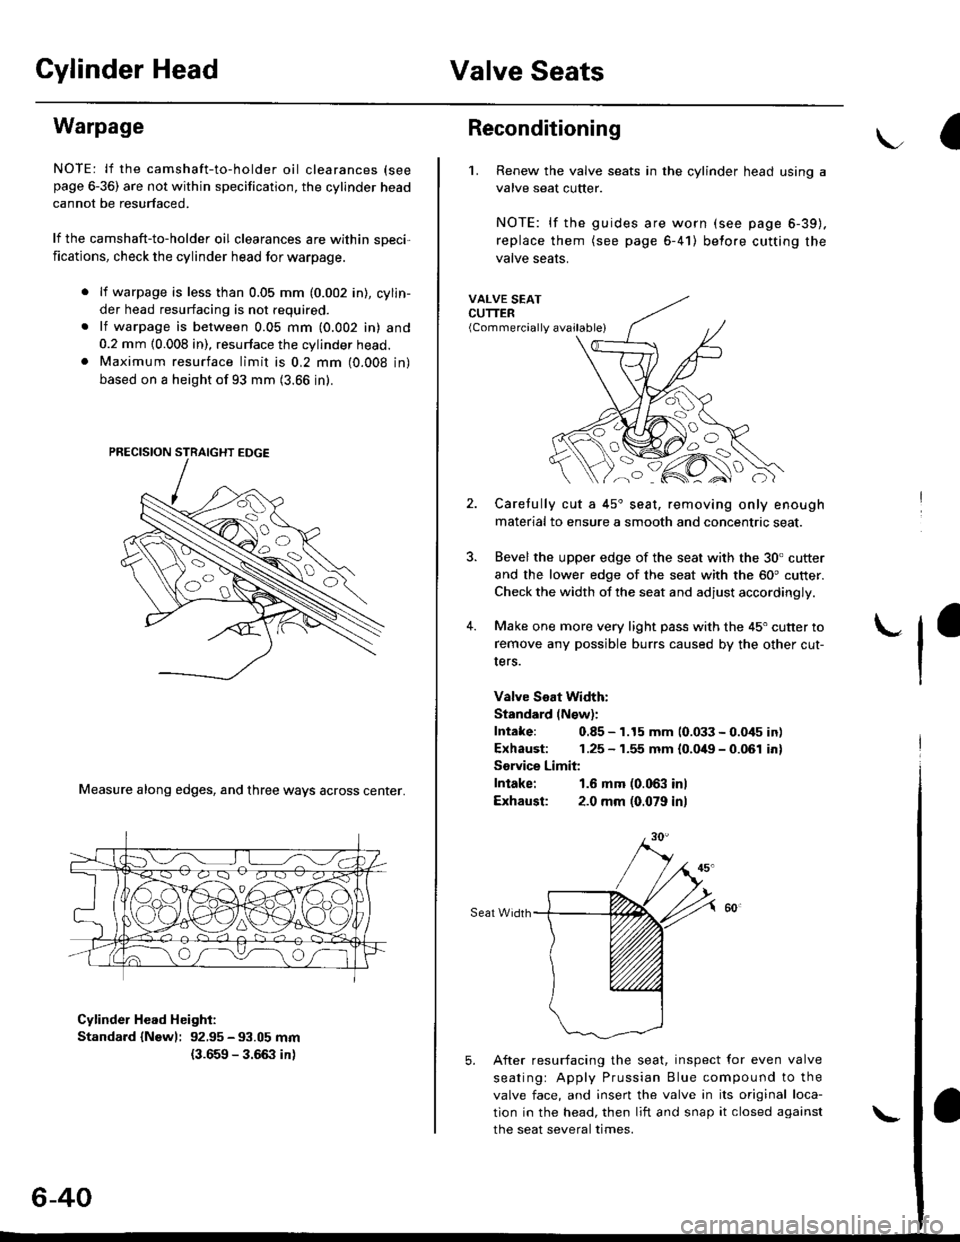 HONDA CIVIC 1998 6.G Owners Guide Cylinder HeadValve Seats
Warpage
NOTE: lf the camshaft-to-holder oil clearances (see
page 6-36) are not within specification, the cylinder head
cannot be resurfaced.
lf the camshaft-to-holder oil clea